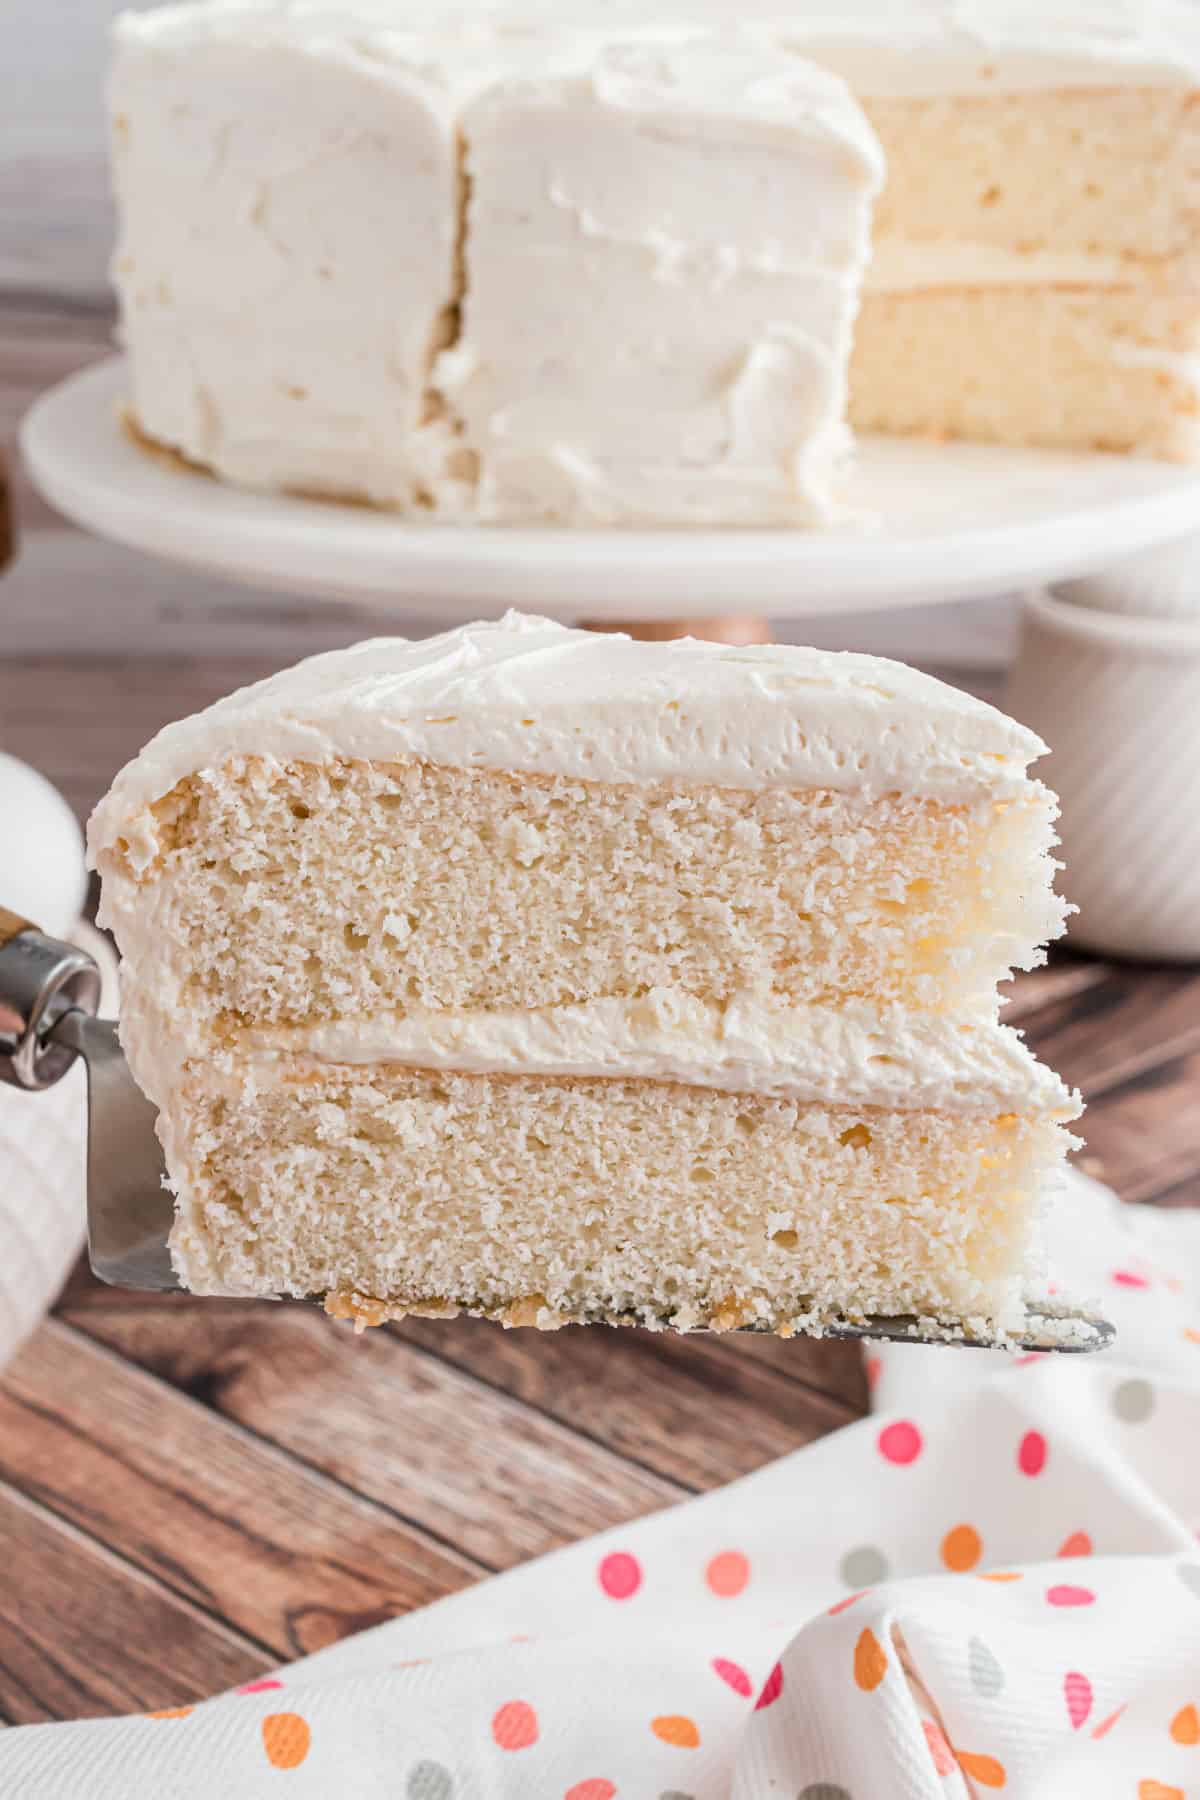 Slice of white cake with vanilla frosting on a spatula to serve.